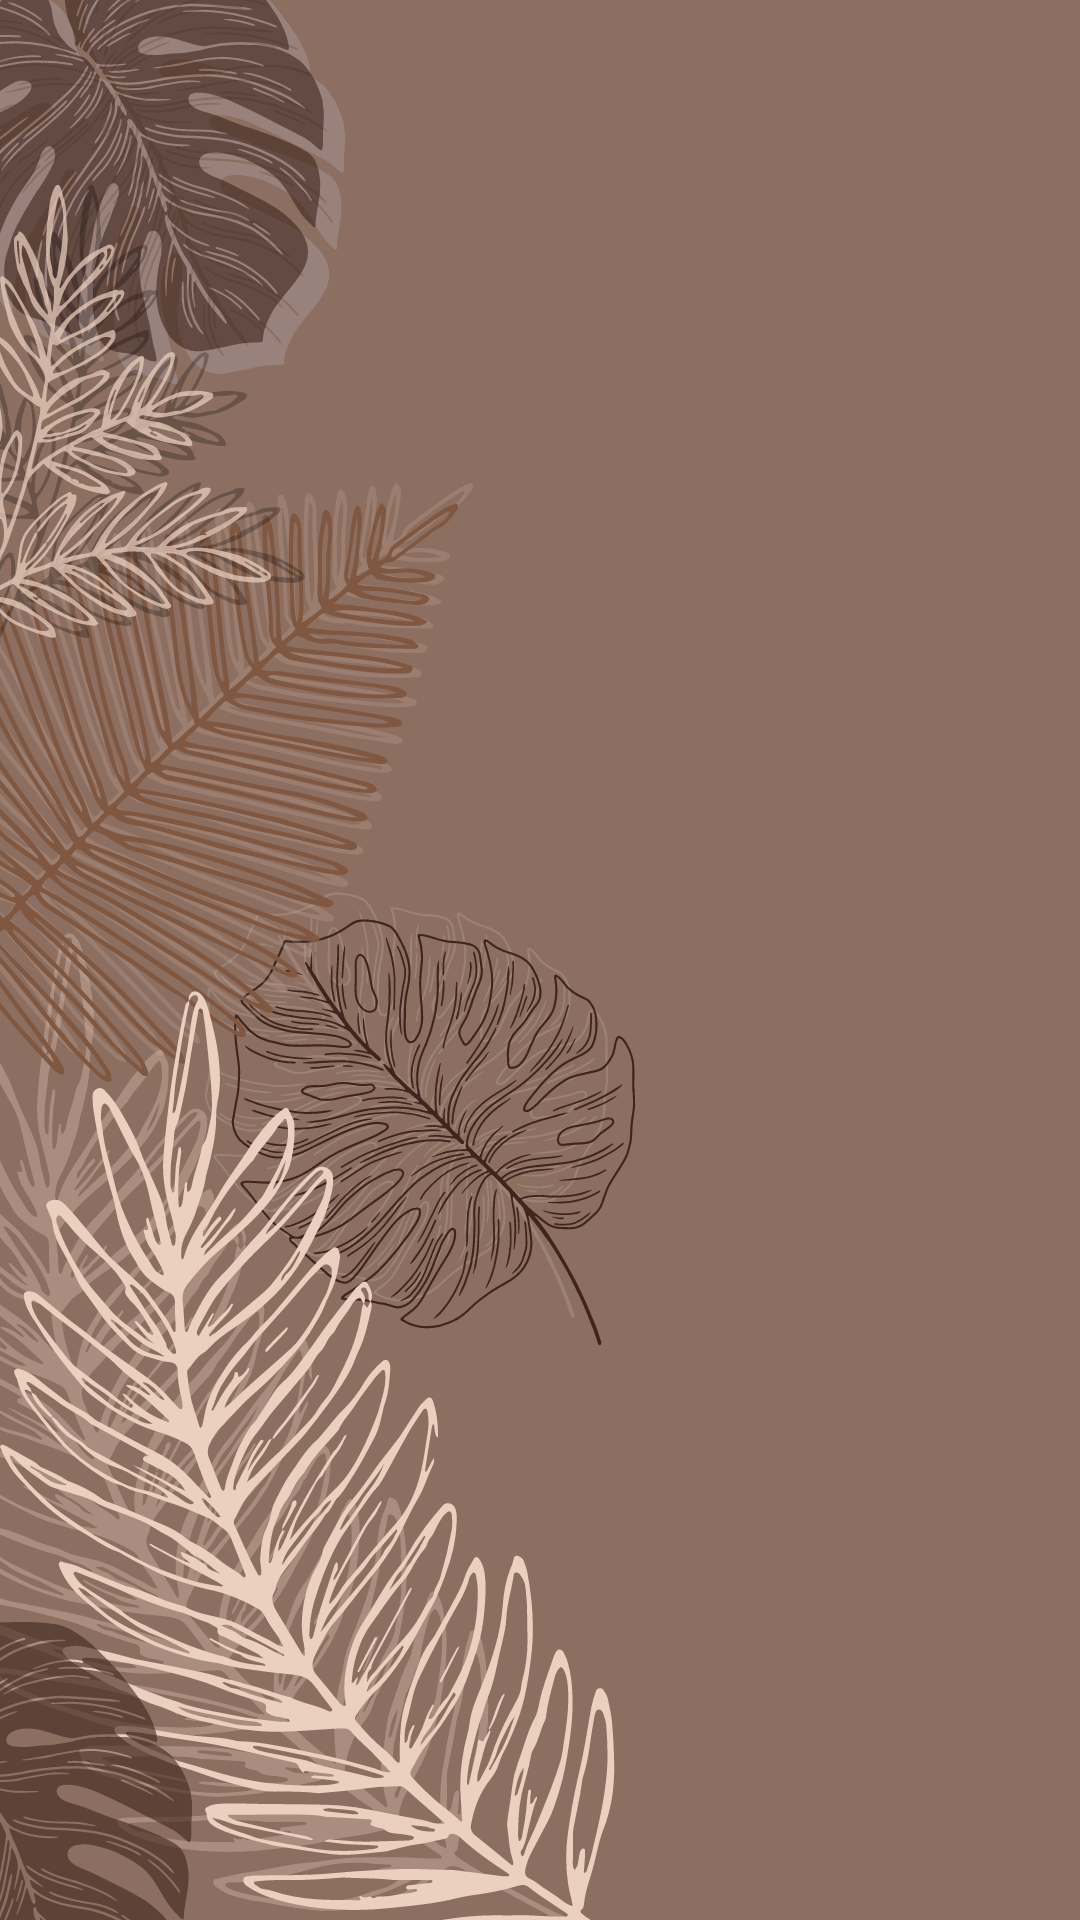 A brown background with palm leaves in the top left corner and a plant with roots in the bottom right corner. - Minimalist